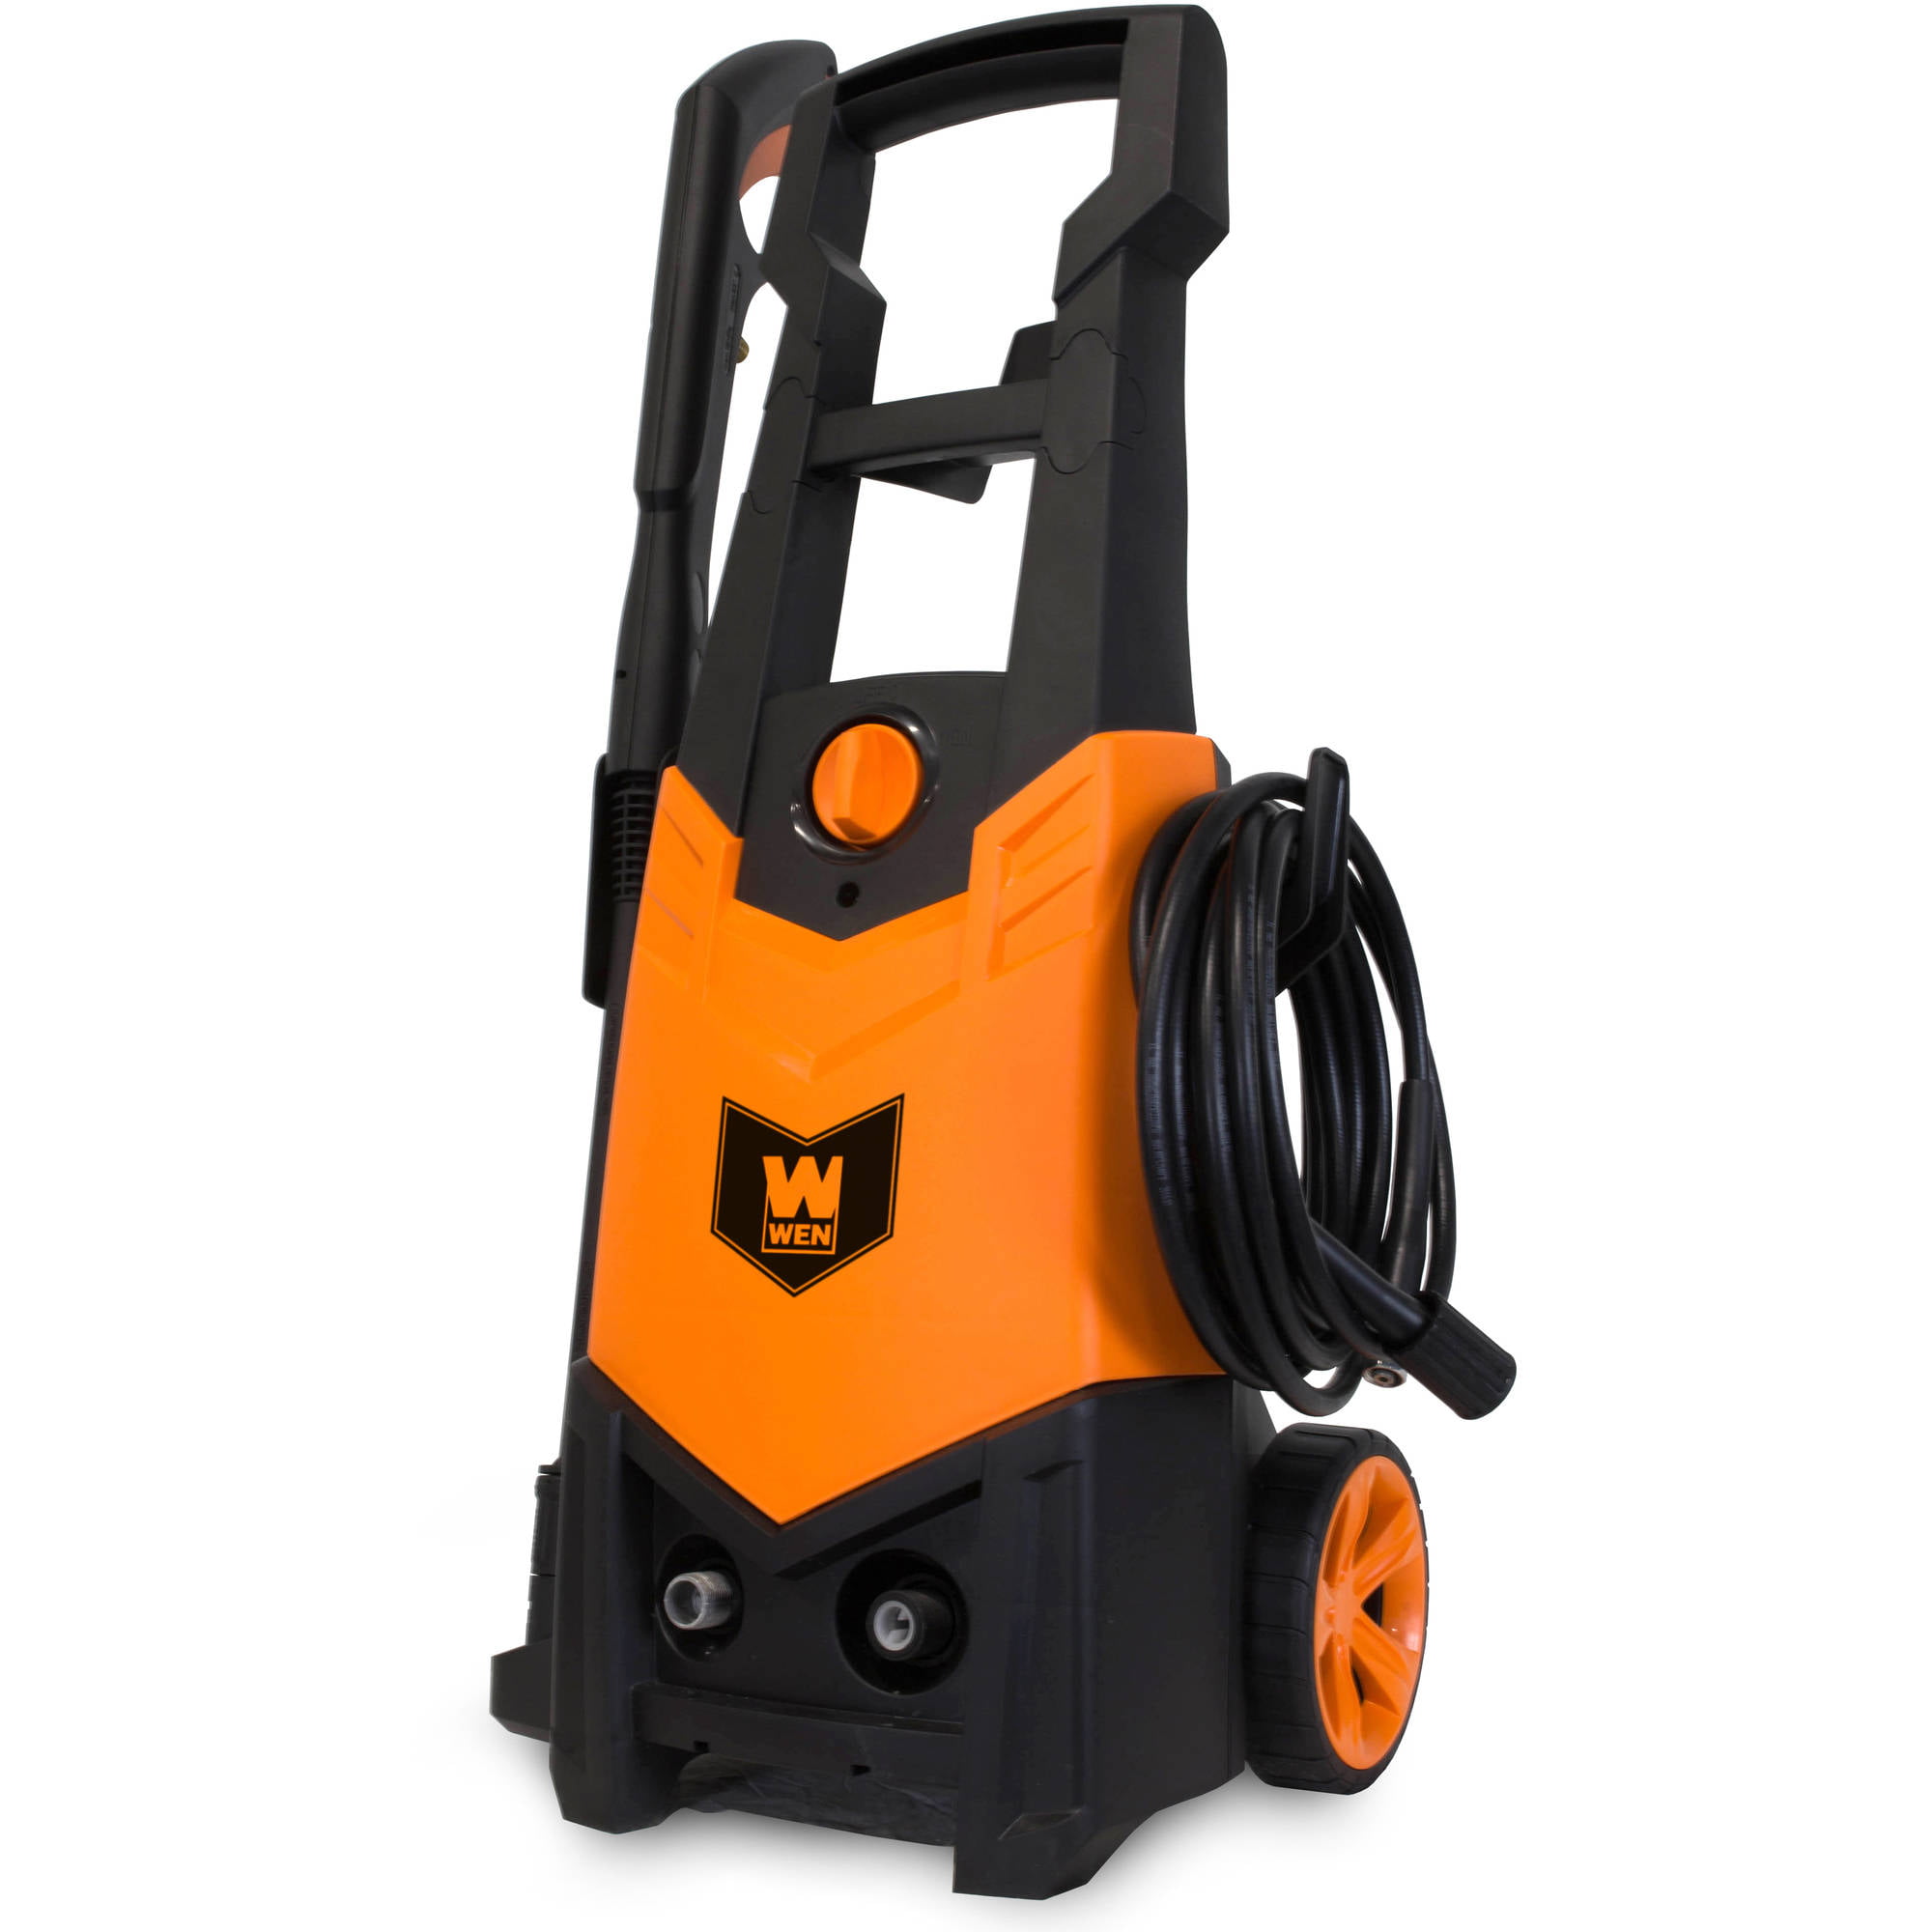 WEN PW20 2030 PSI 1.76 GPM 14.5-Amp Variable Flow Electric Pressure Washer 